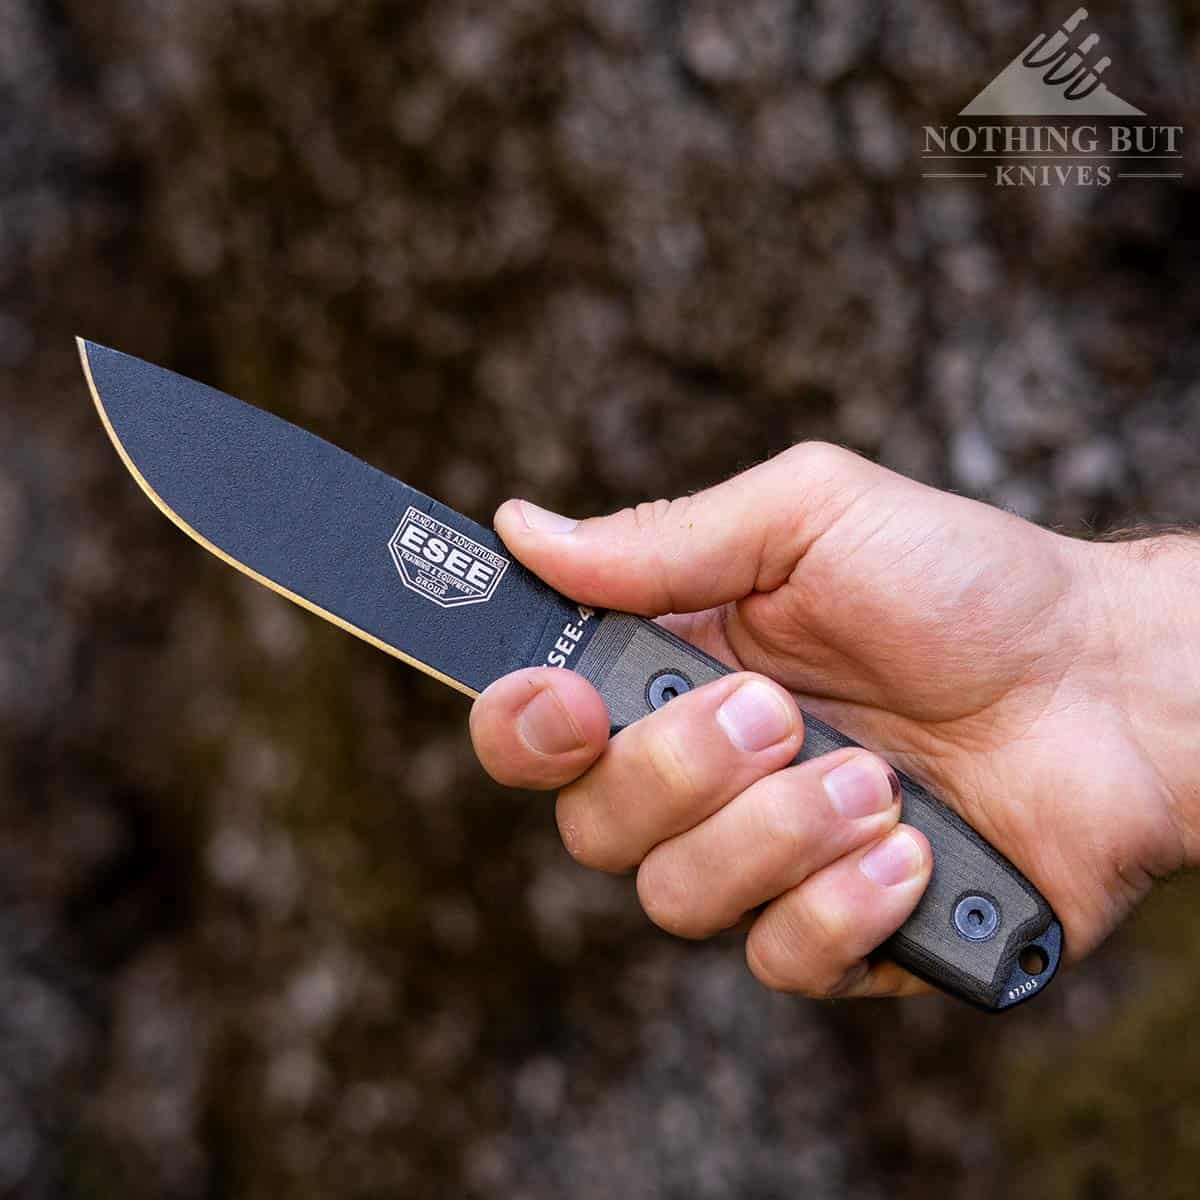 The Esee 4 handle leaves plenty of space to choke up and feels pretty comfortable in hand.